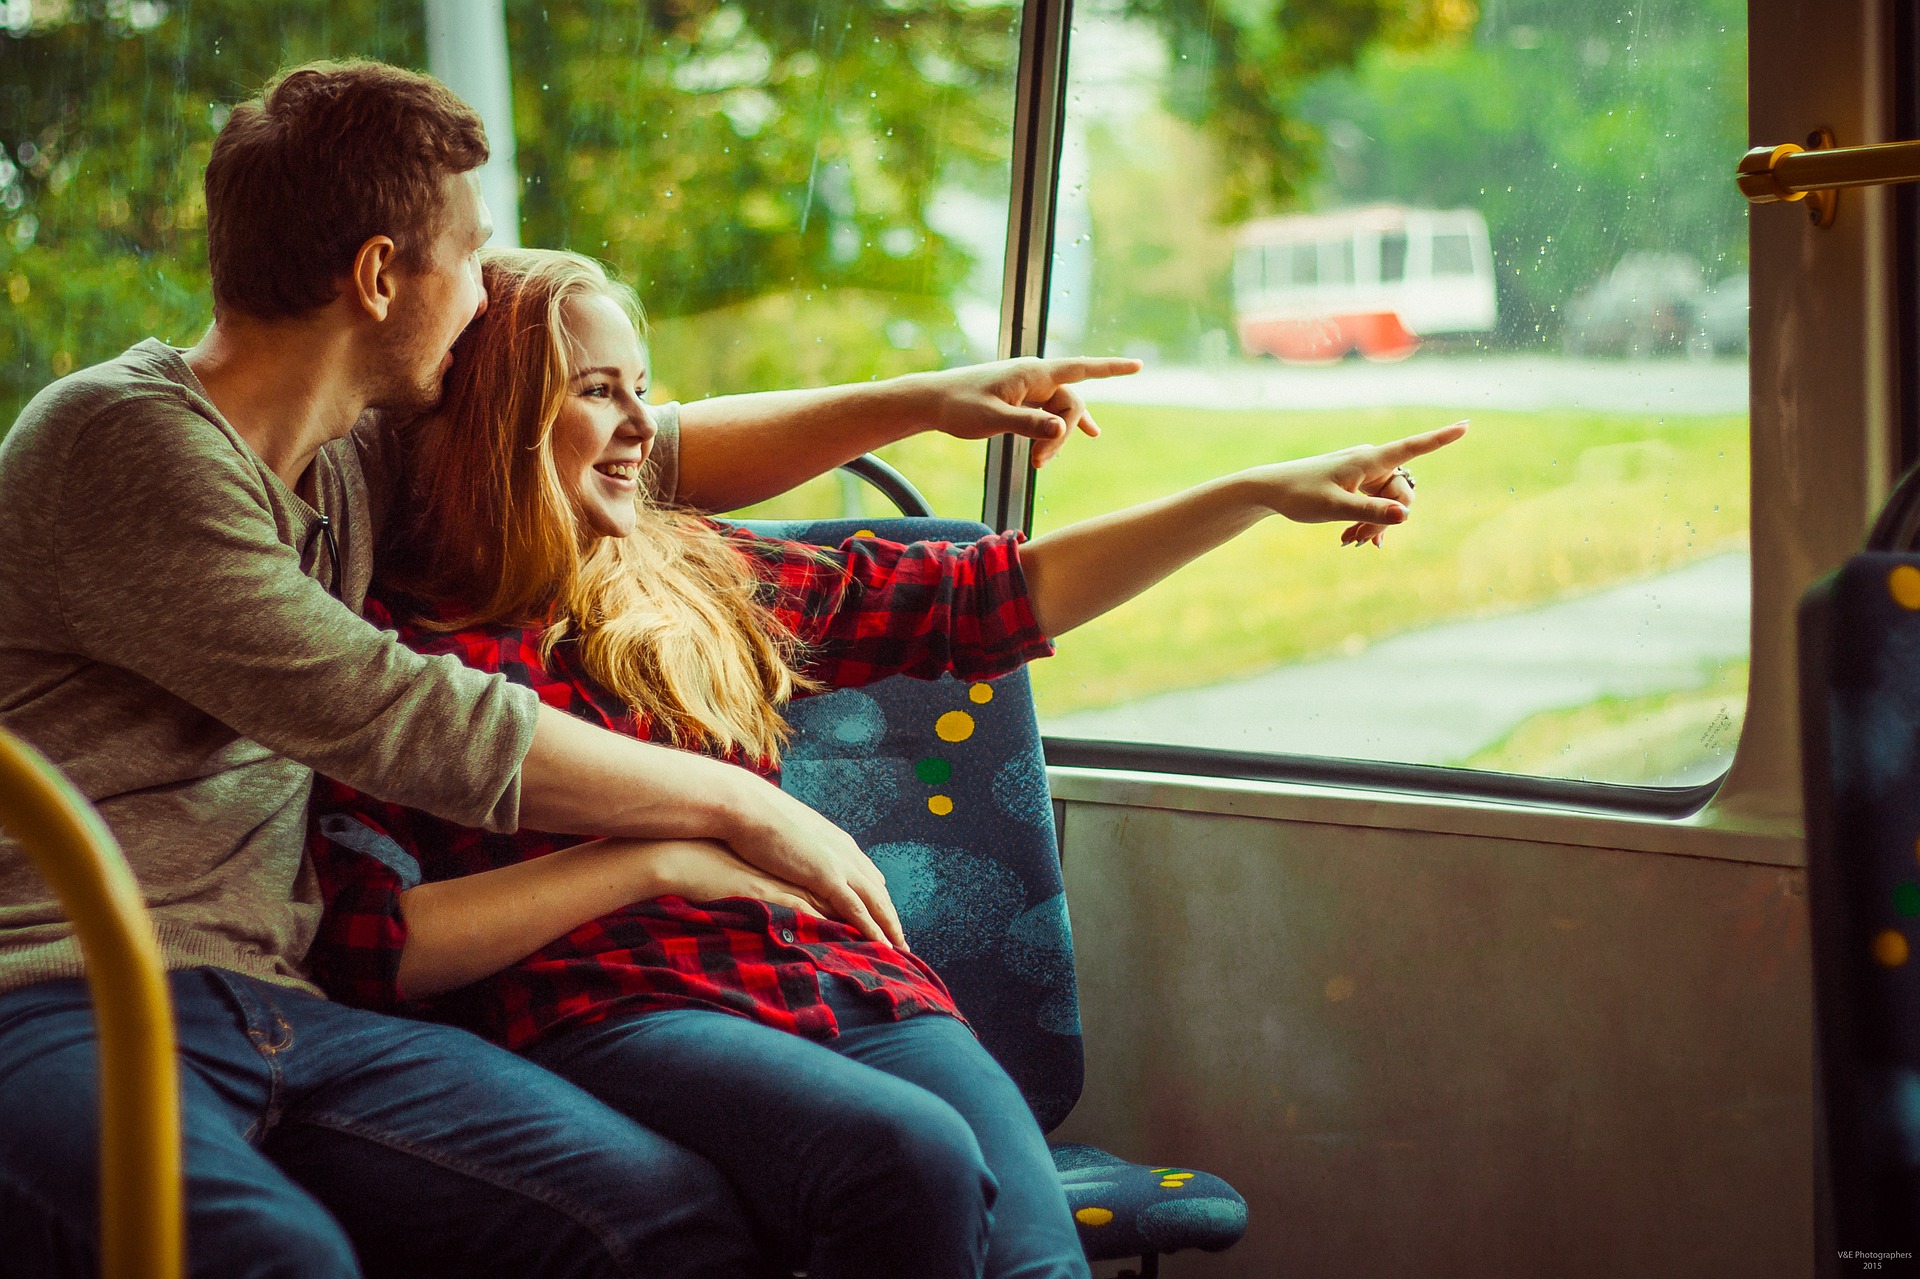 Average Charter Bus Rates and More, What To Check Before Chartering a Bus